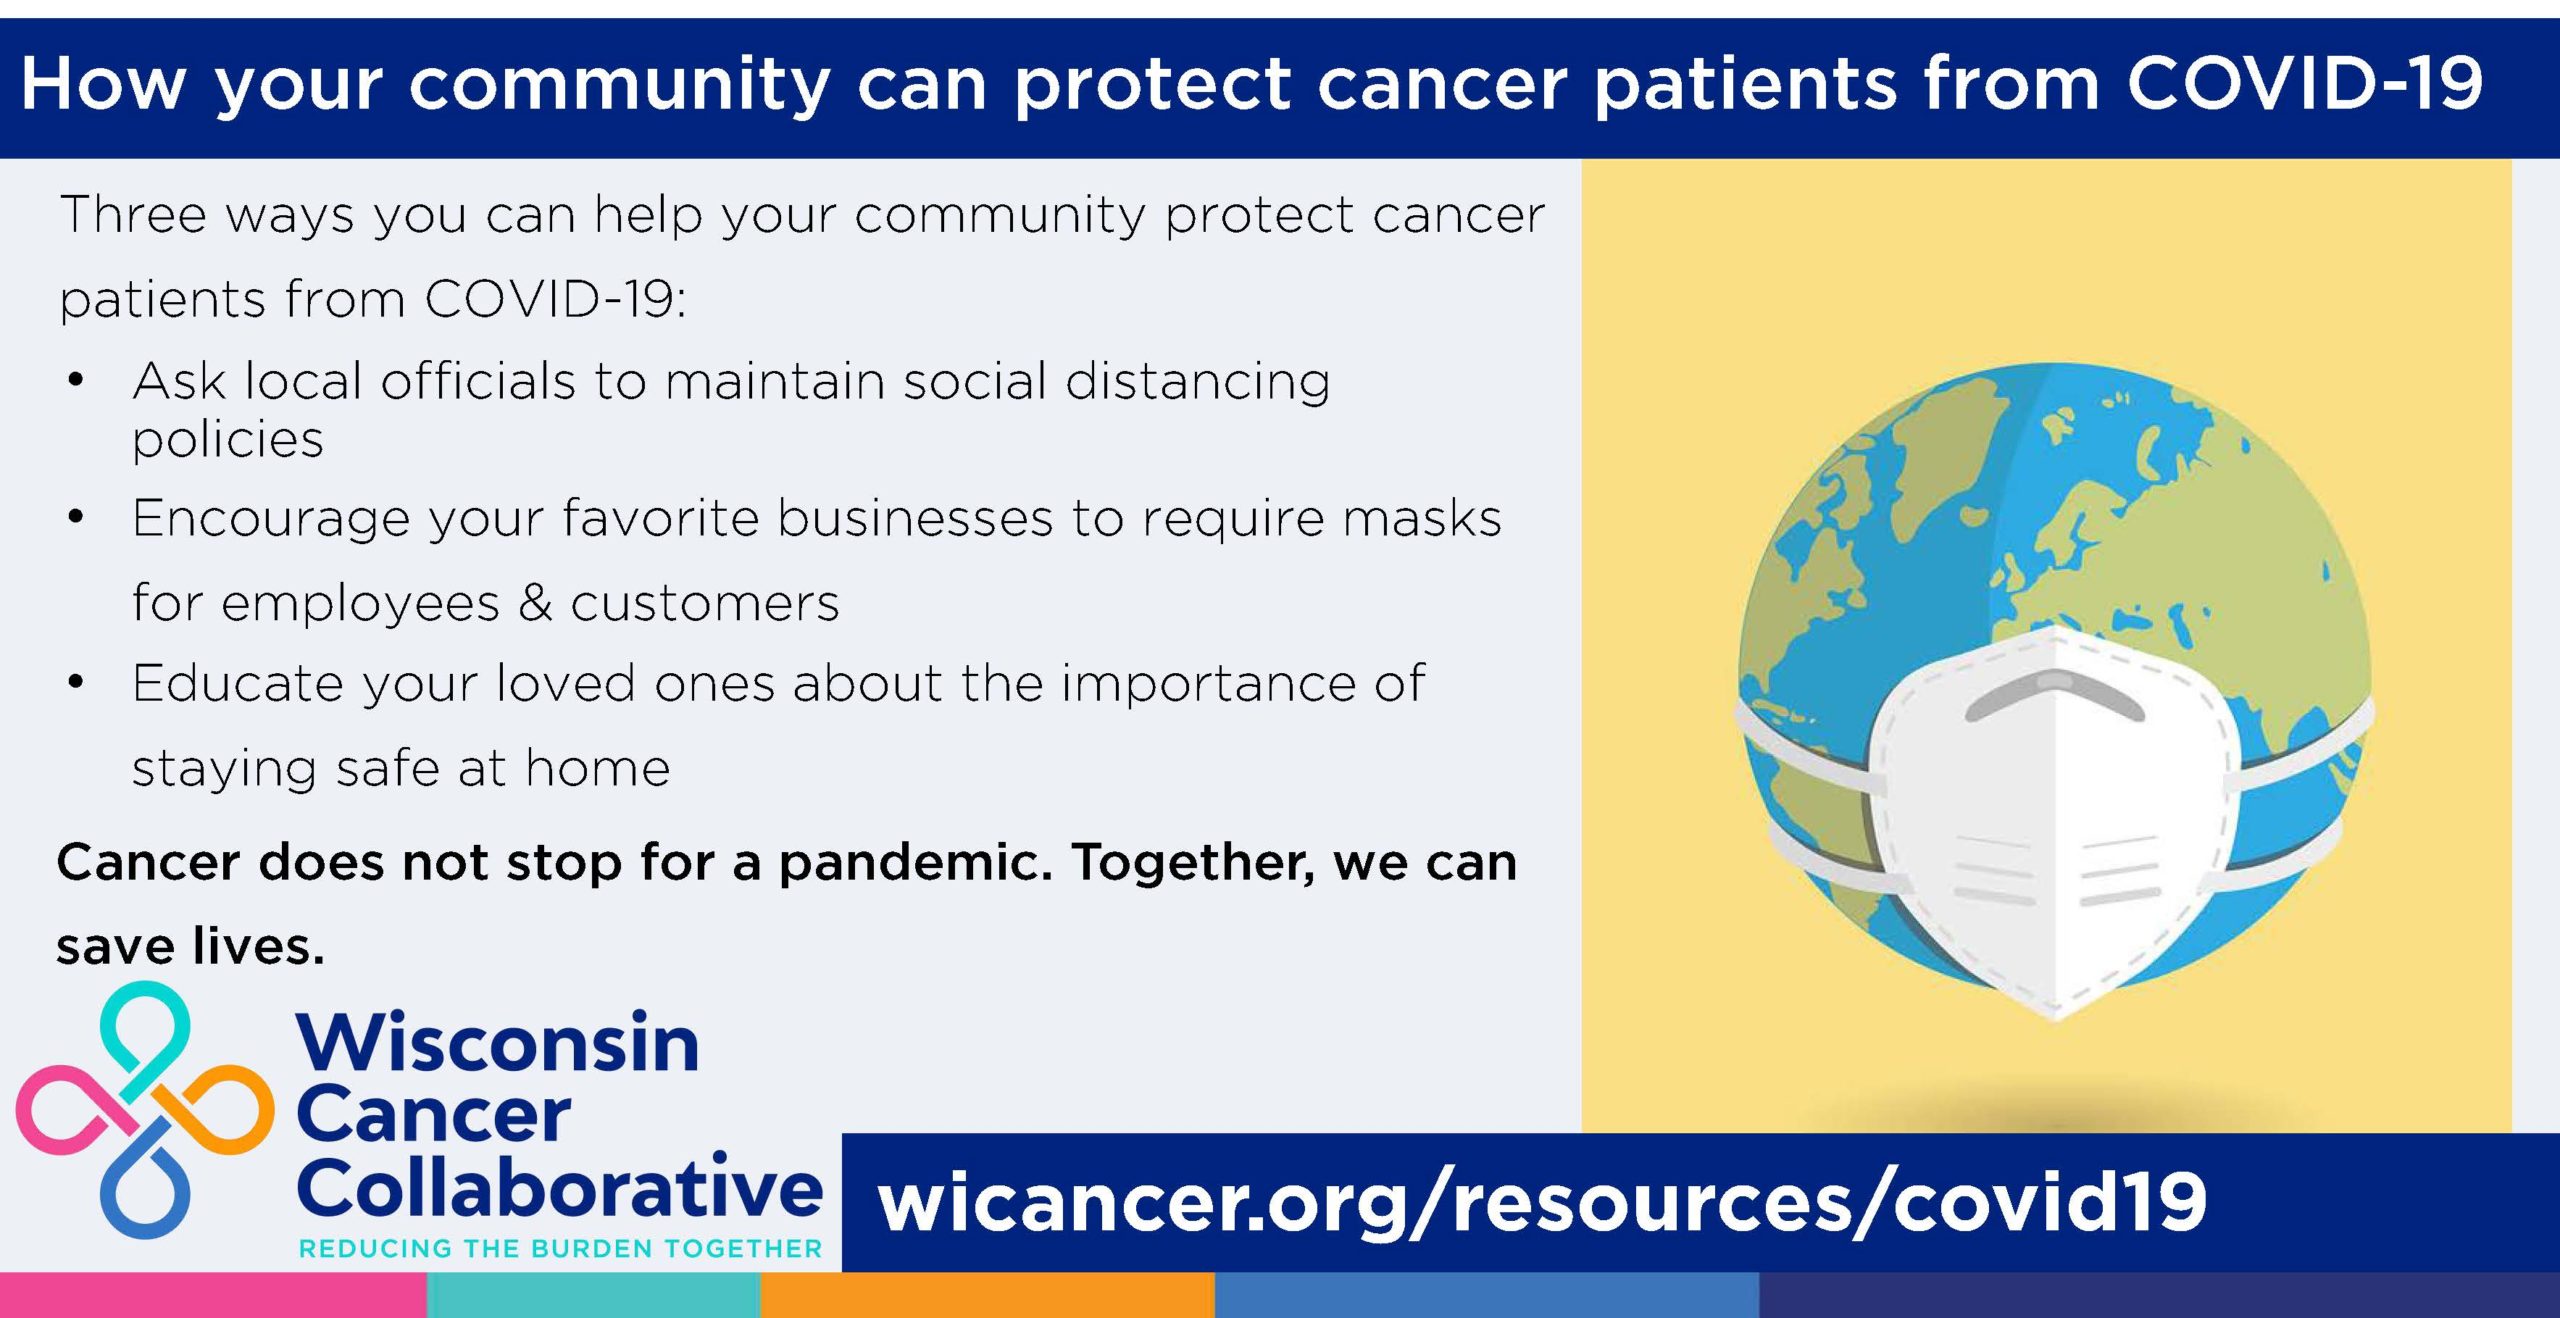 How your community can protect cancer patients from COVID-19